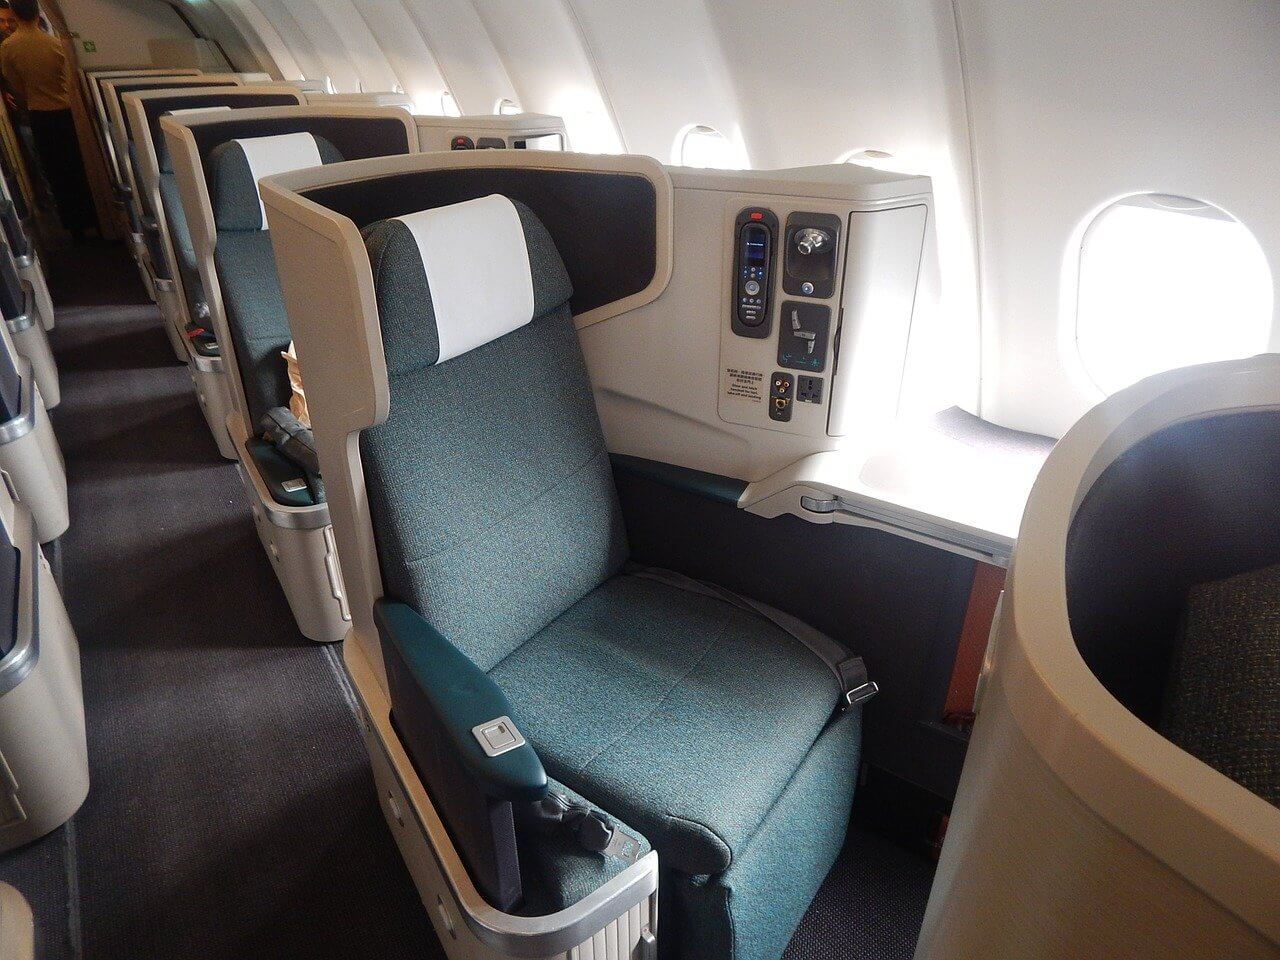 Business Class Seat on Airplane